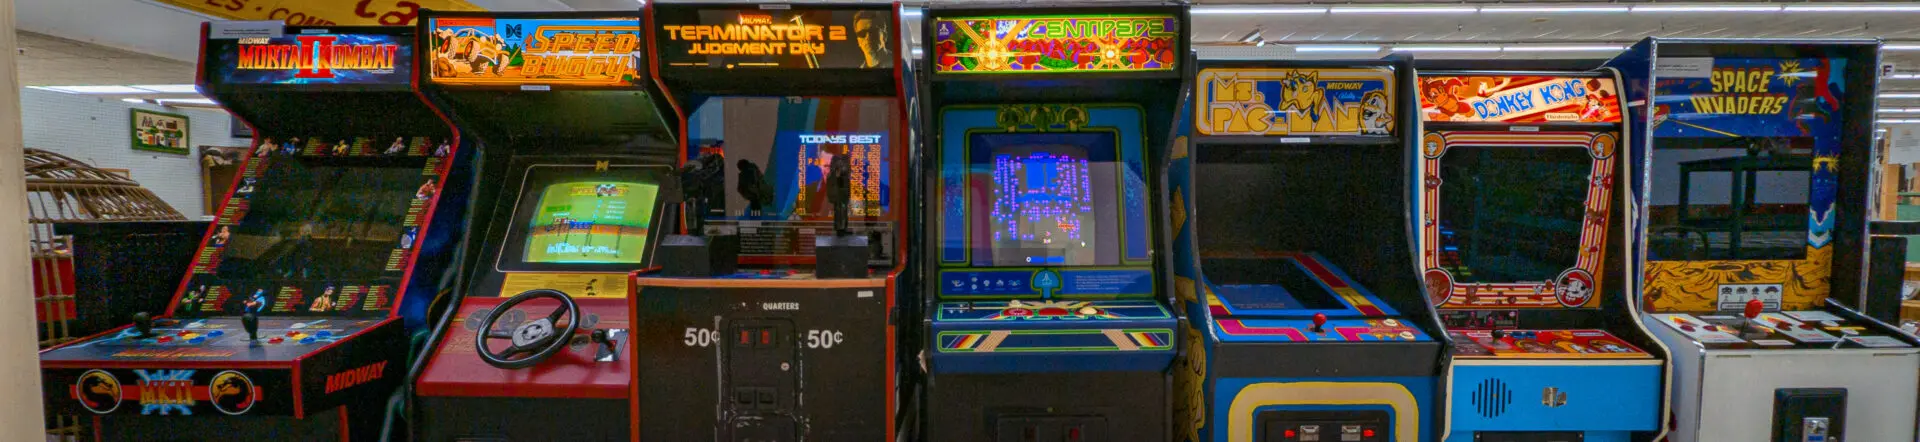 A video game machine is shown in front of another.